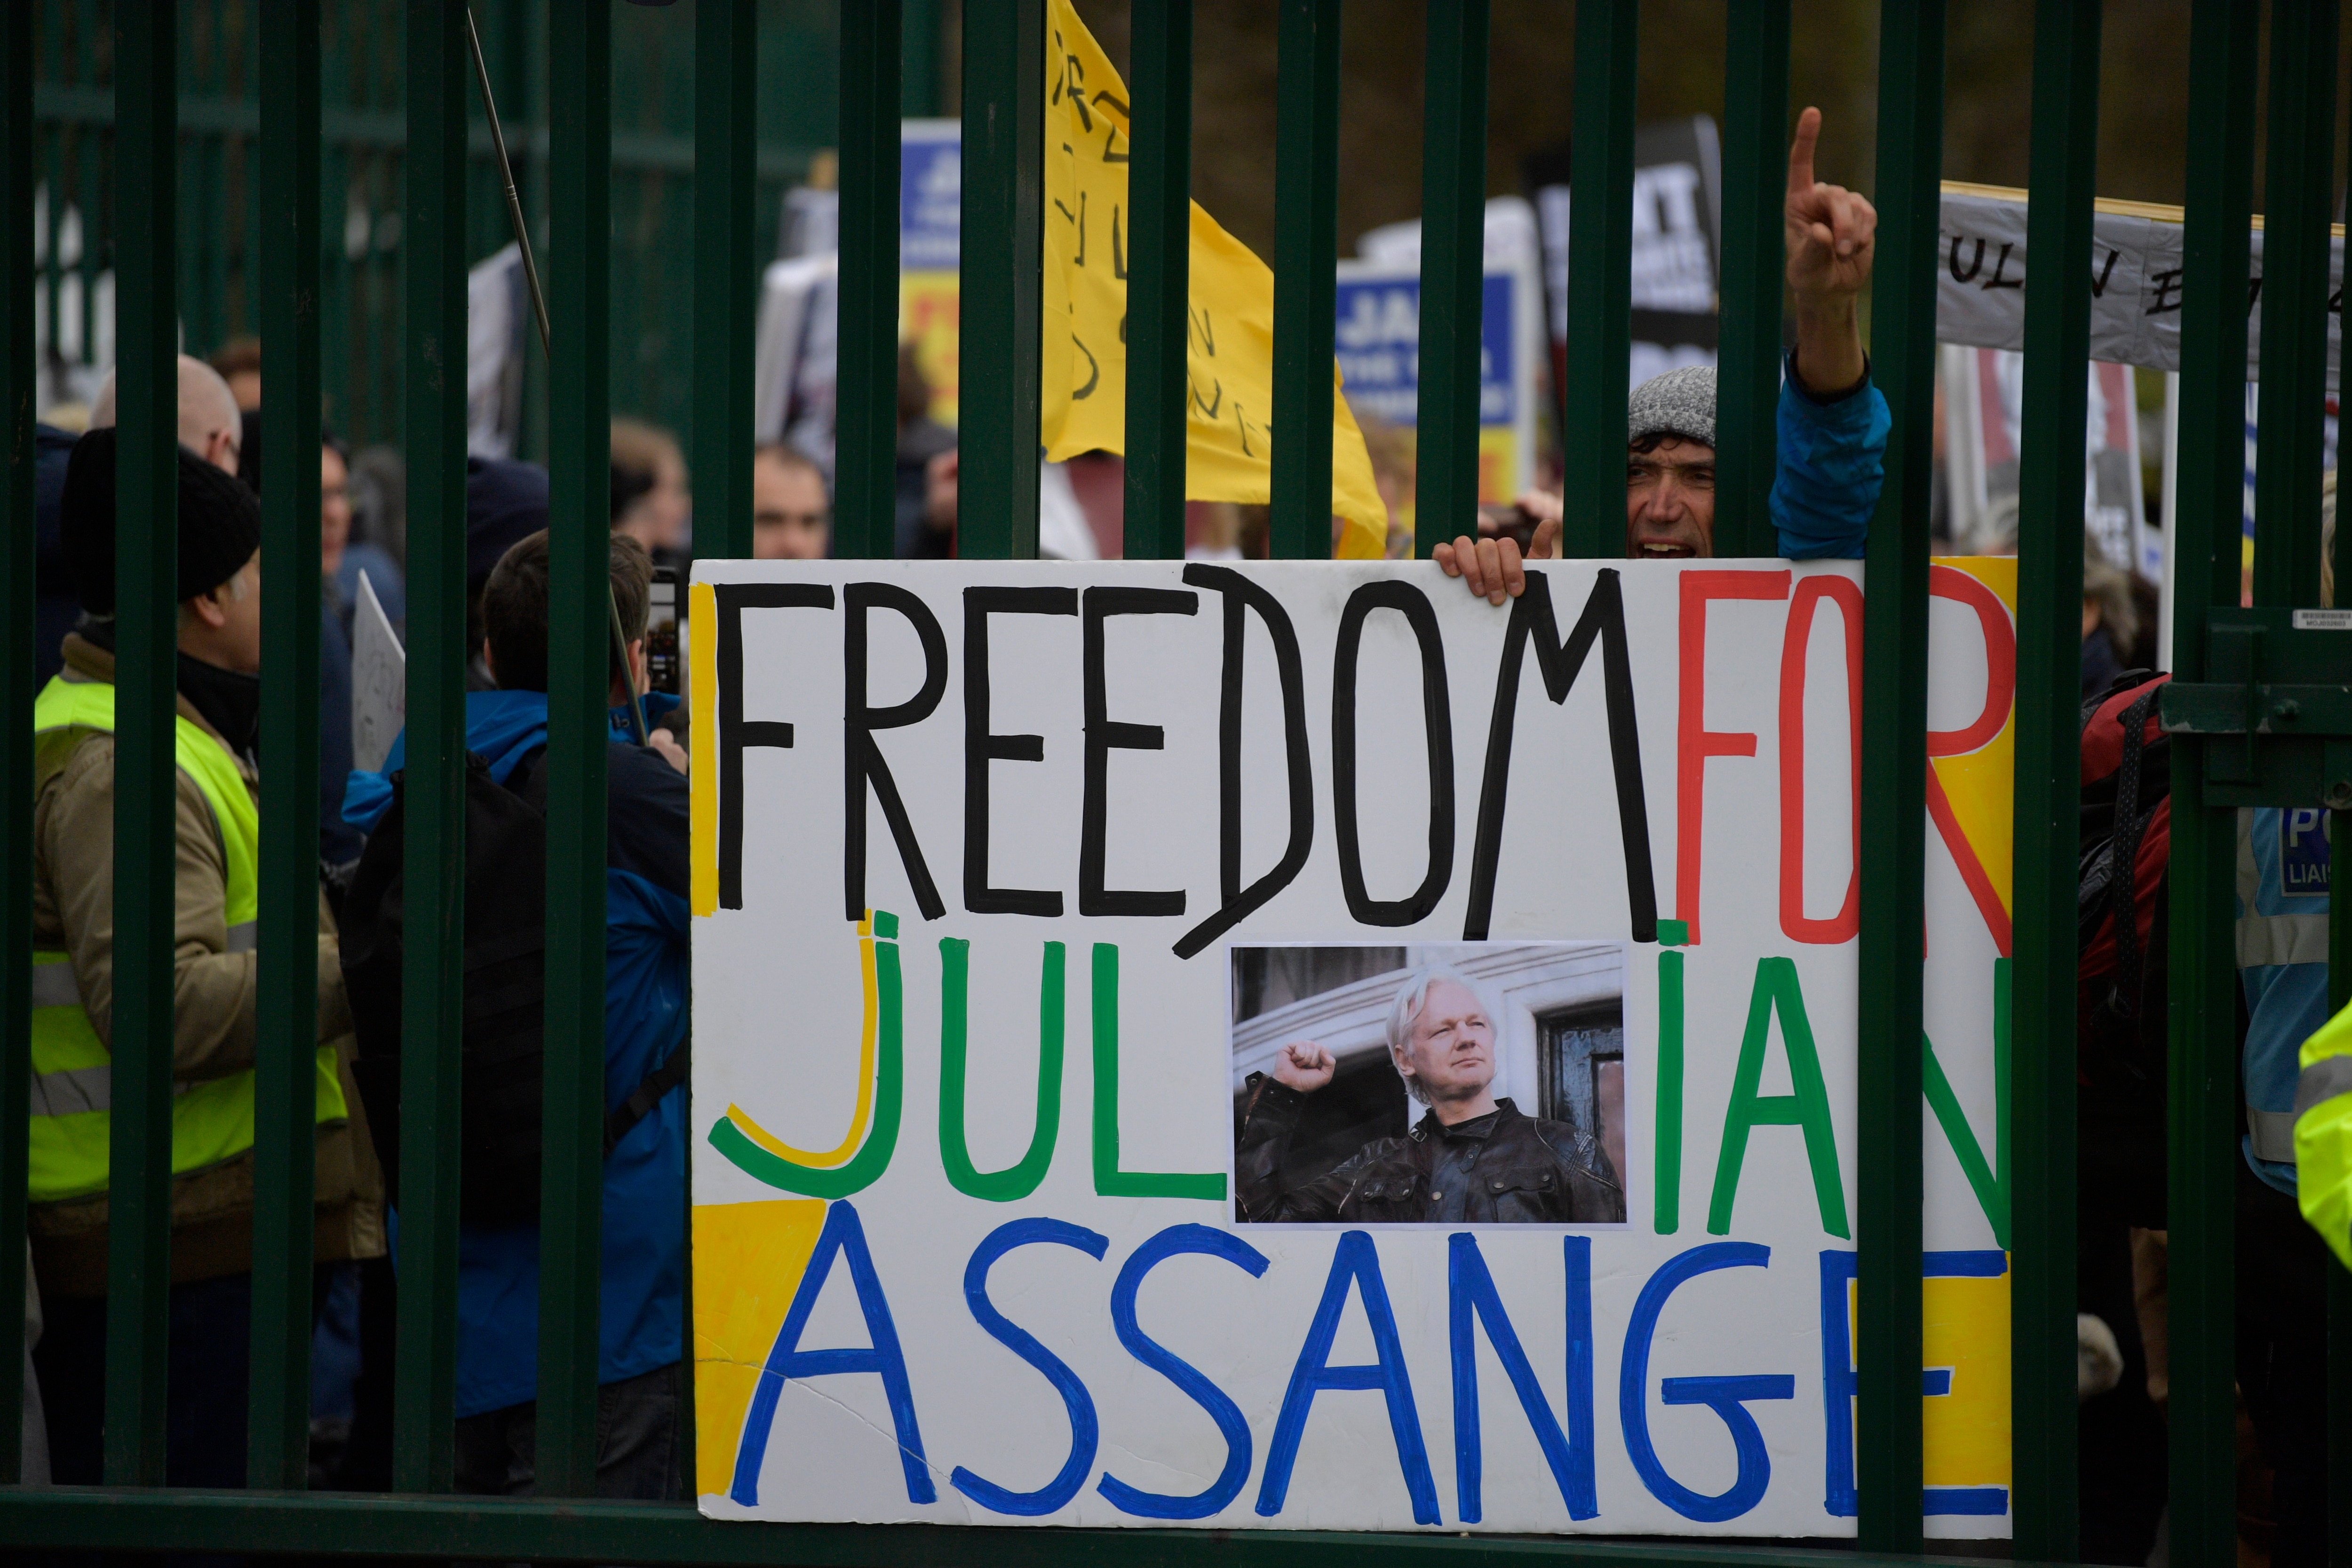 Supporters of Wikileaks founder Julian Assange protest in front of the Woolwich Crown Court in London.